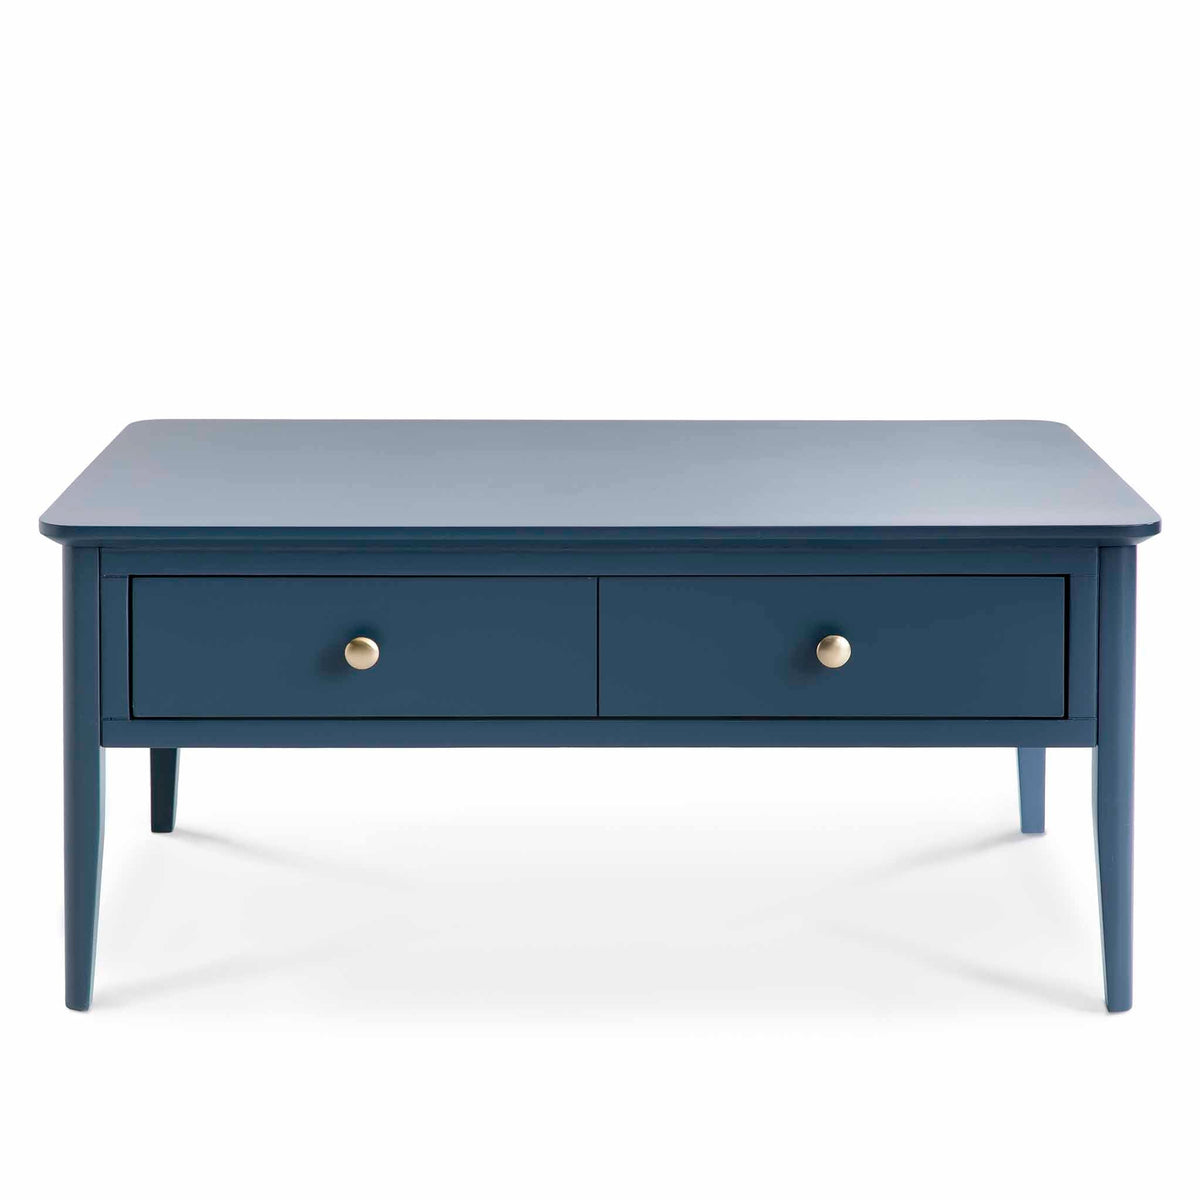 Stirling Blue Coffee Table - Front view